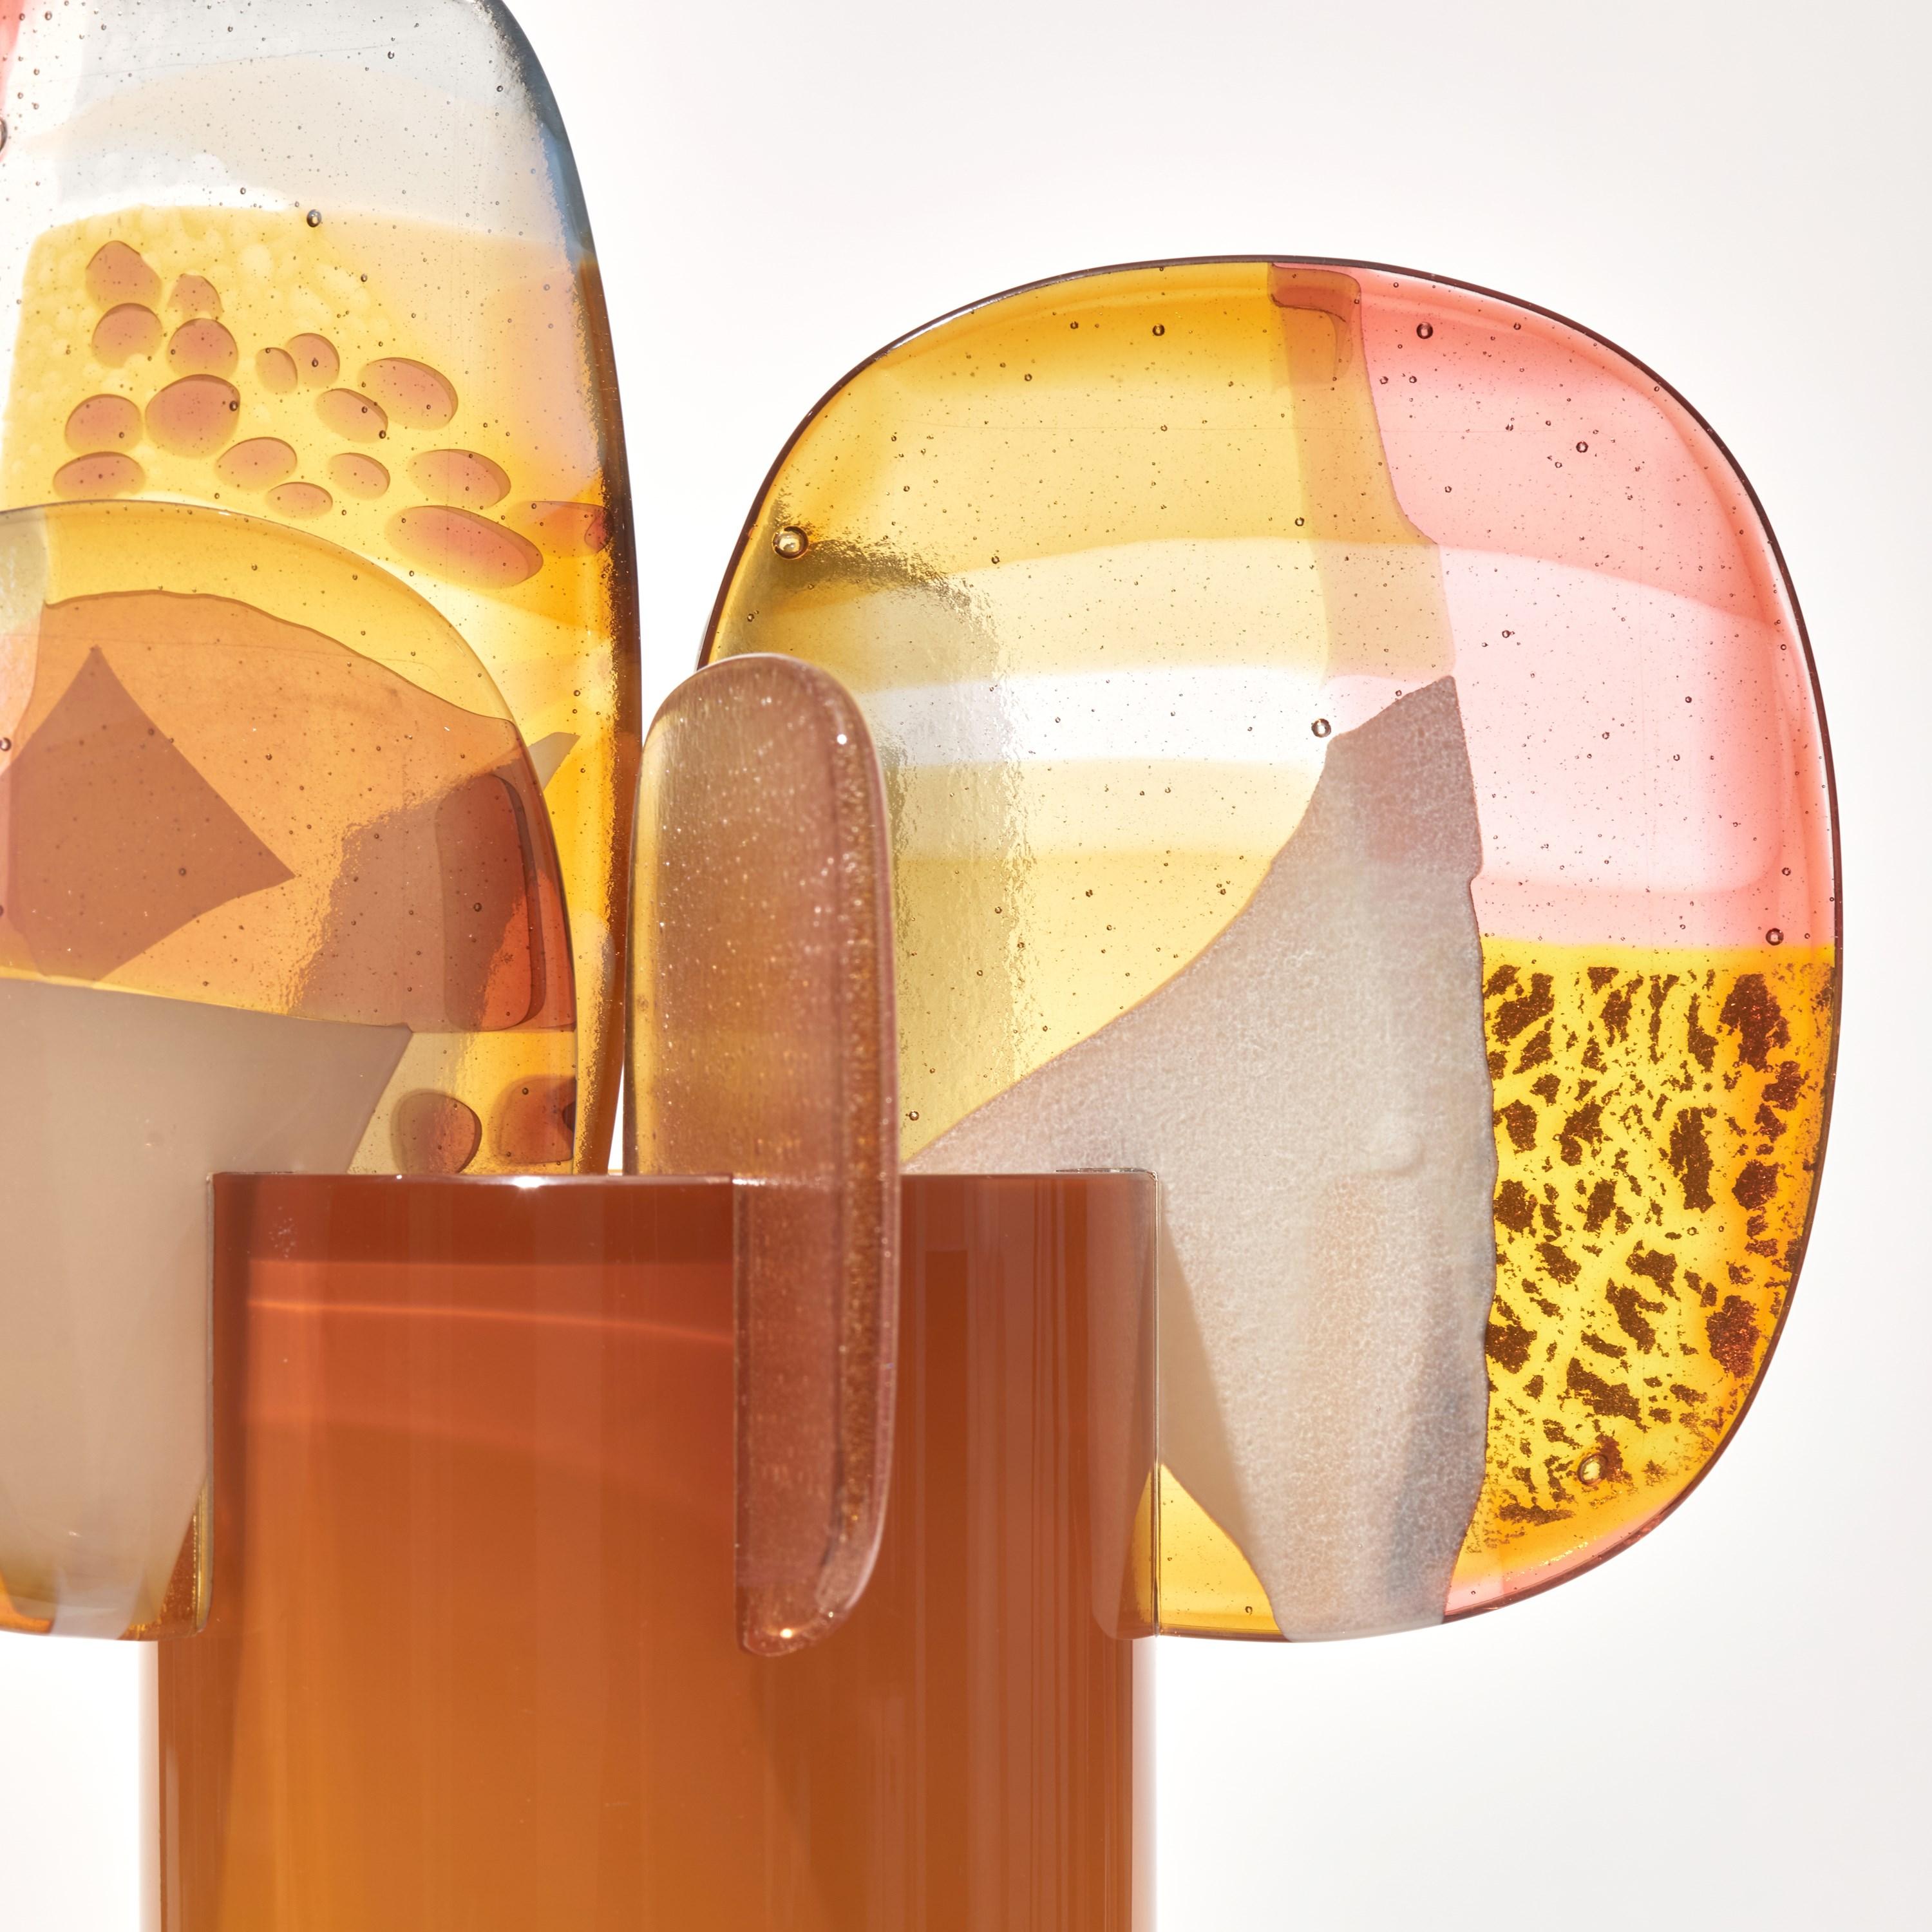 British Paradise 04 in Amber, an orange, gold & pink glass sculpture by Amy Cushing